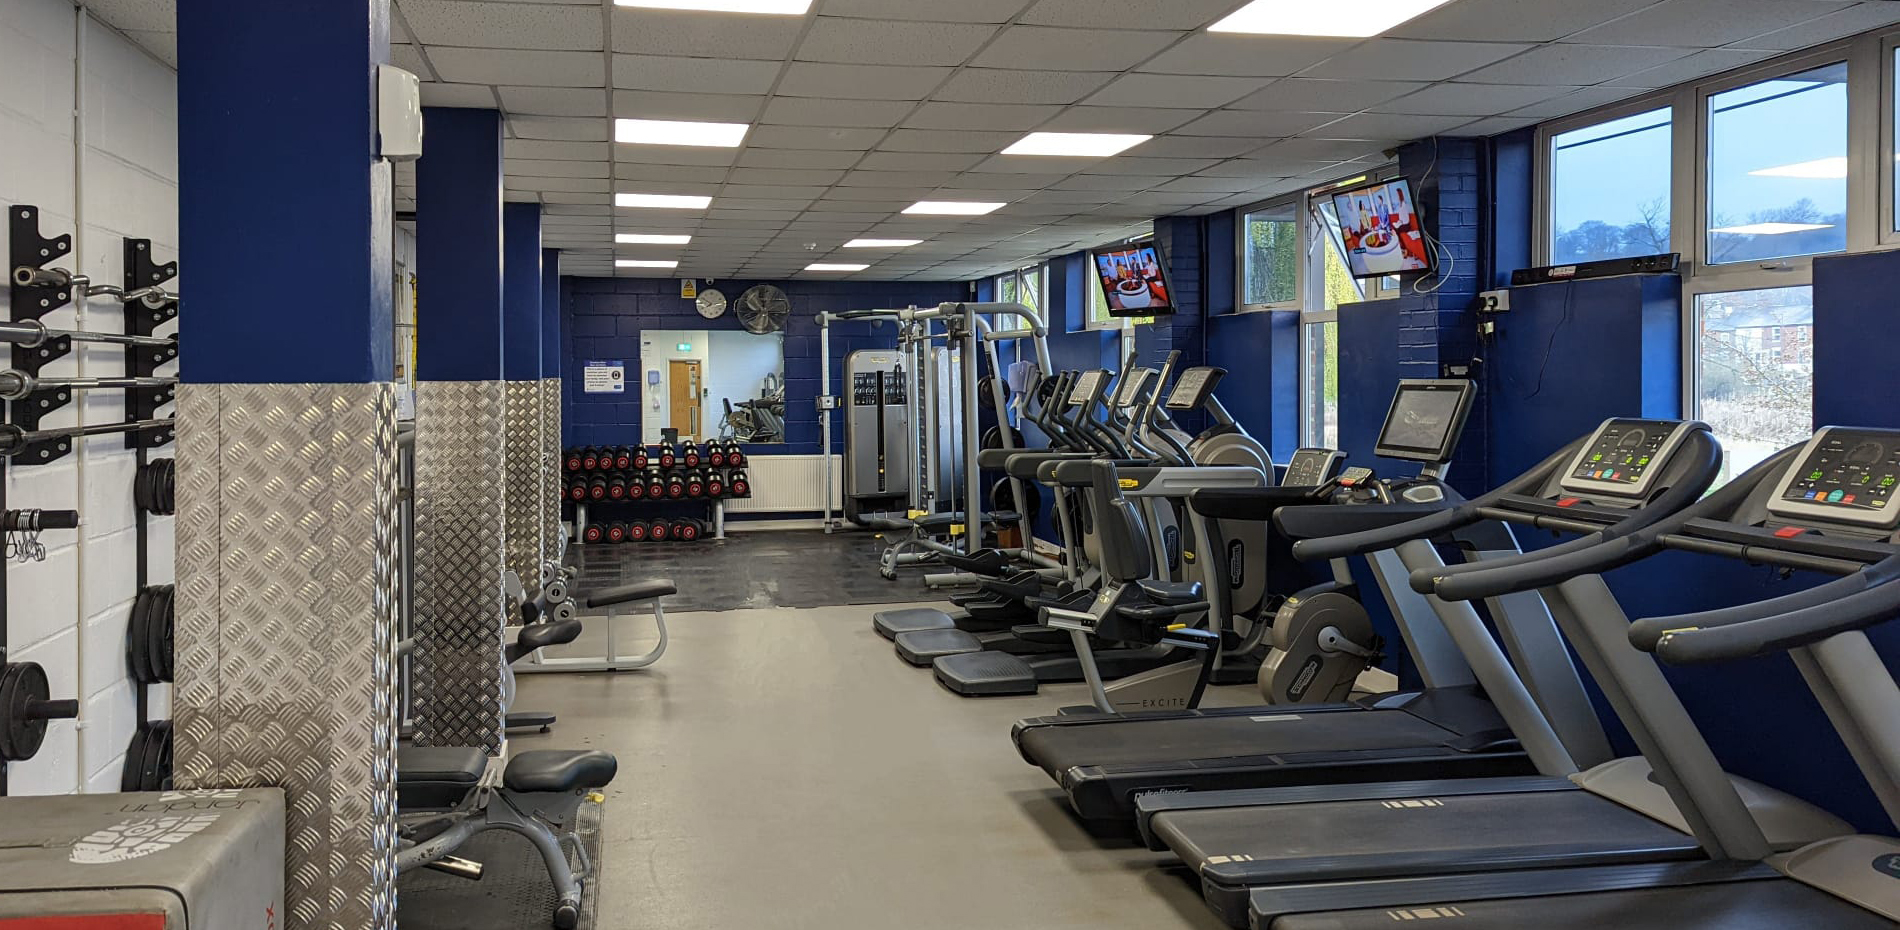 Chesham Moor gym with new equipment and newly decorated April 2022